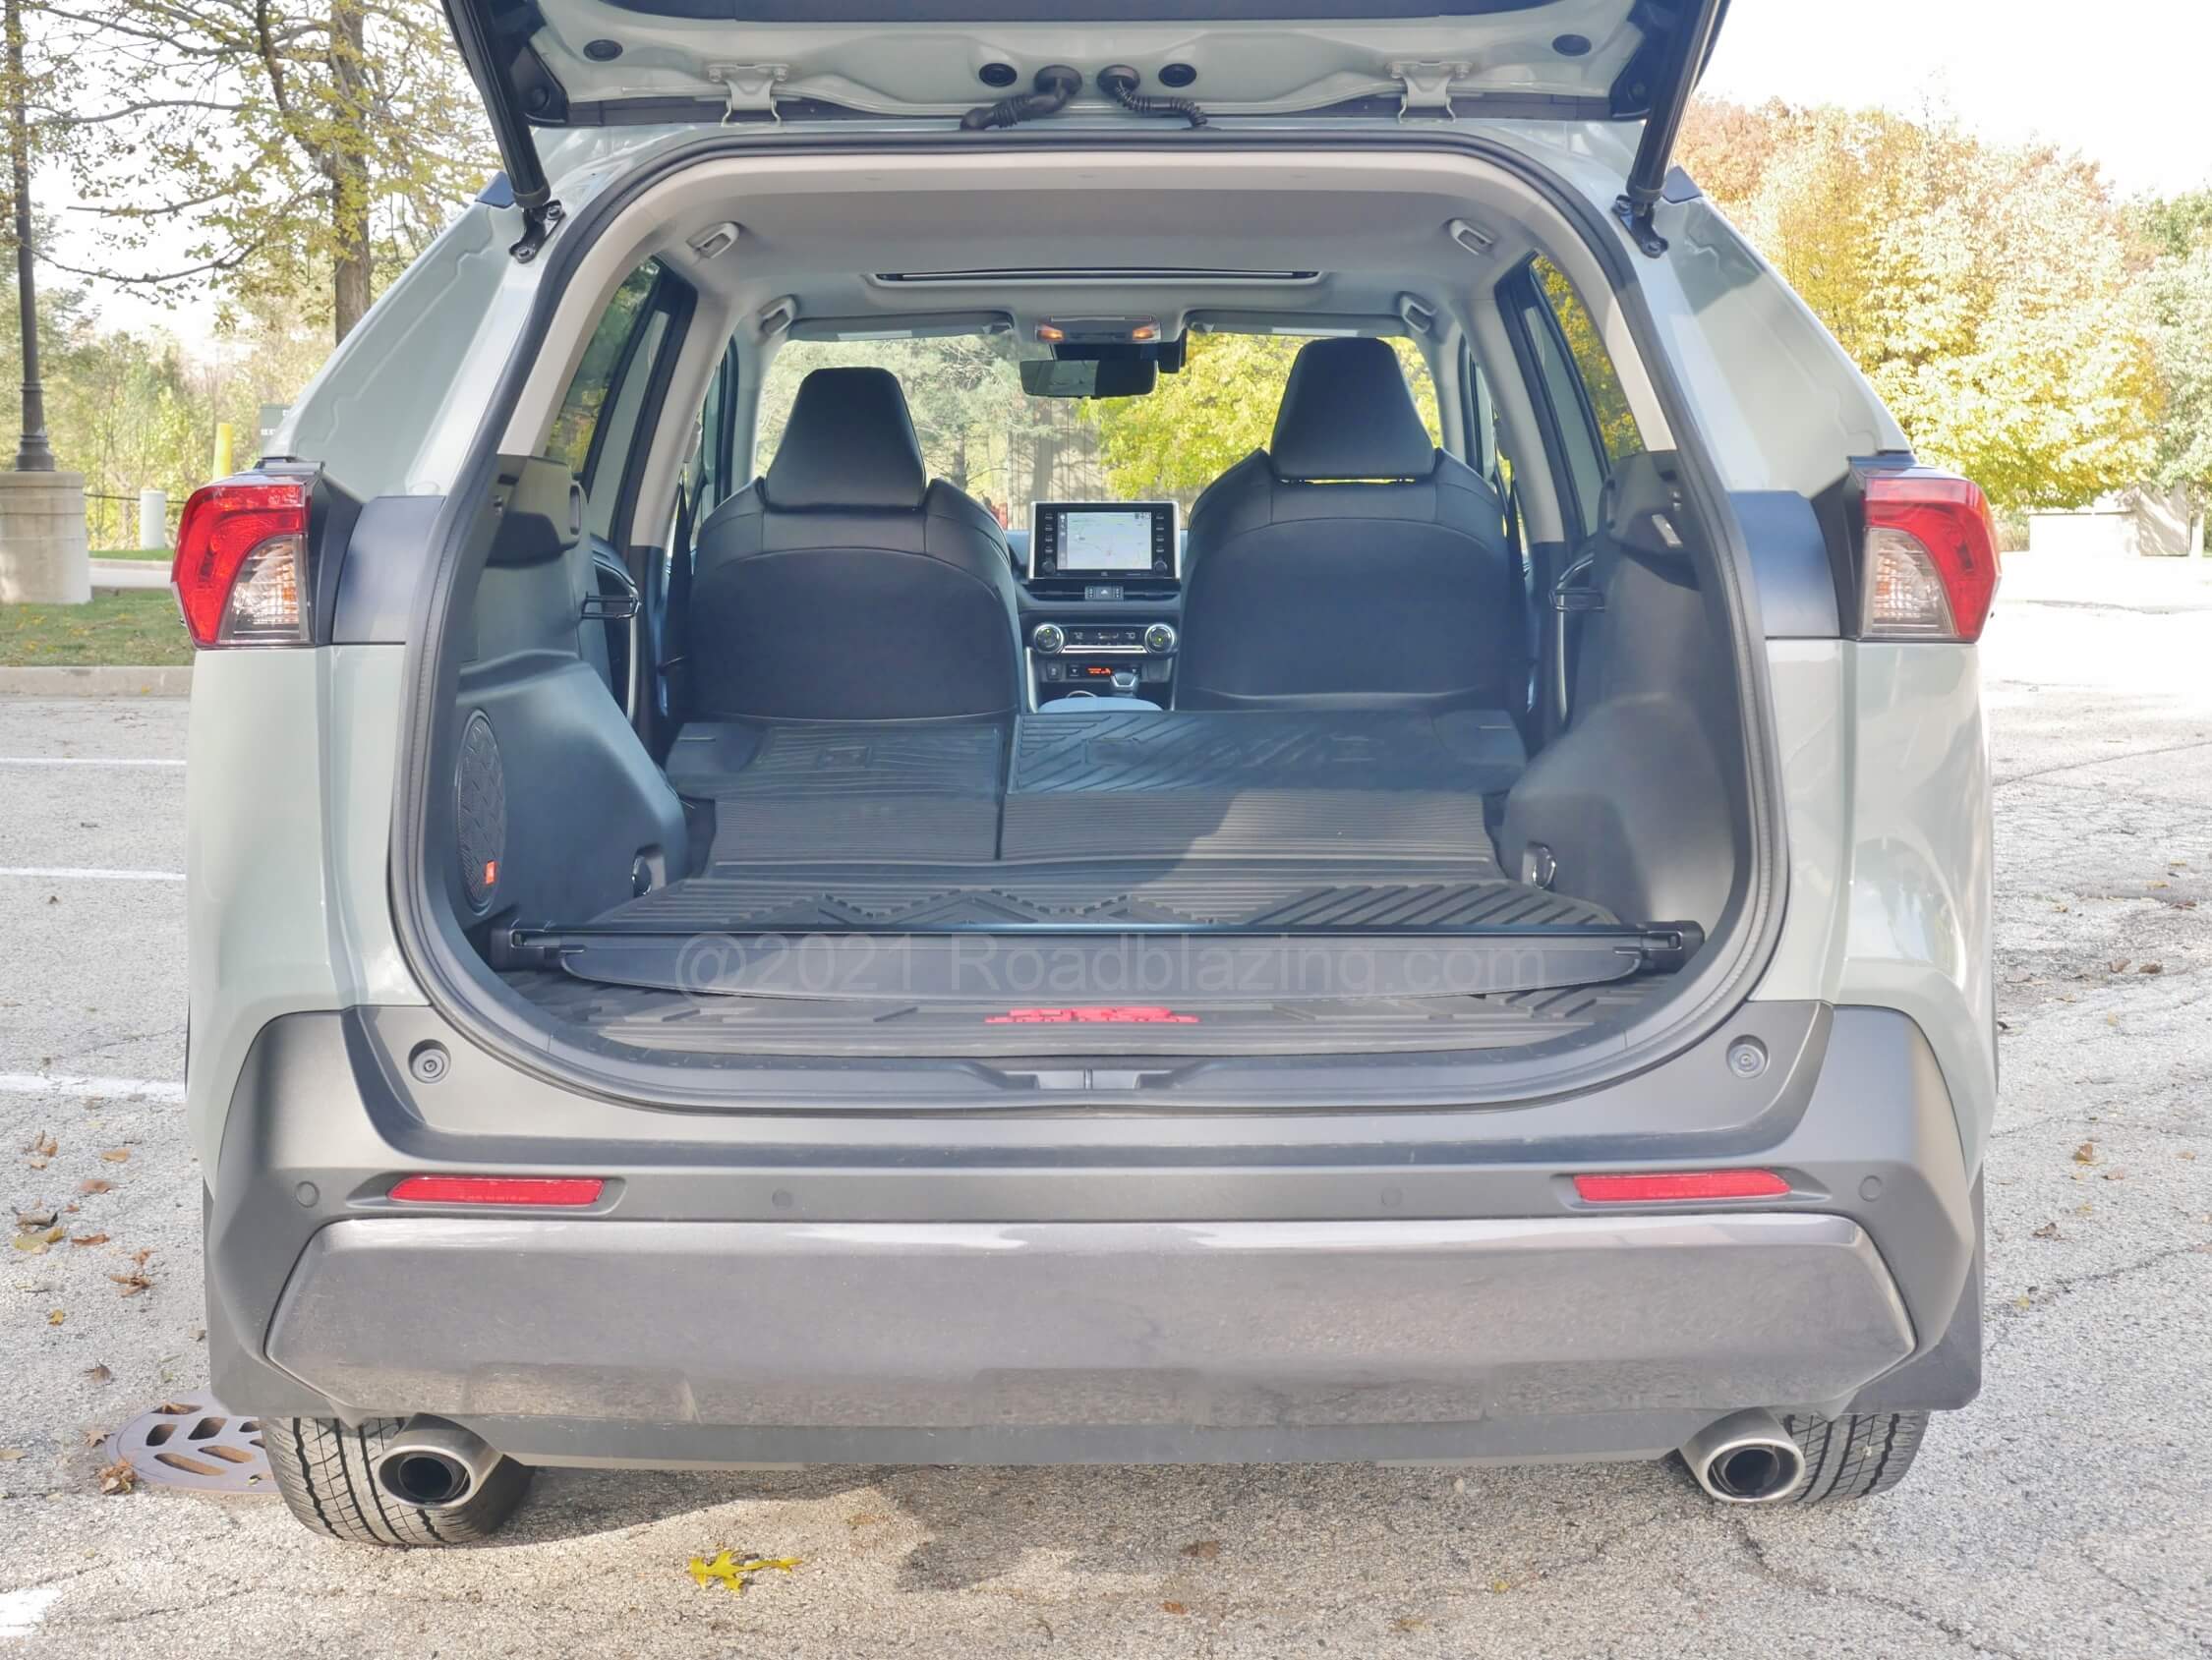 2021 Toyota RAV4 TRD Off Road: 37 cubic foot cargo bay expands to 70 cubic feet.